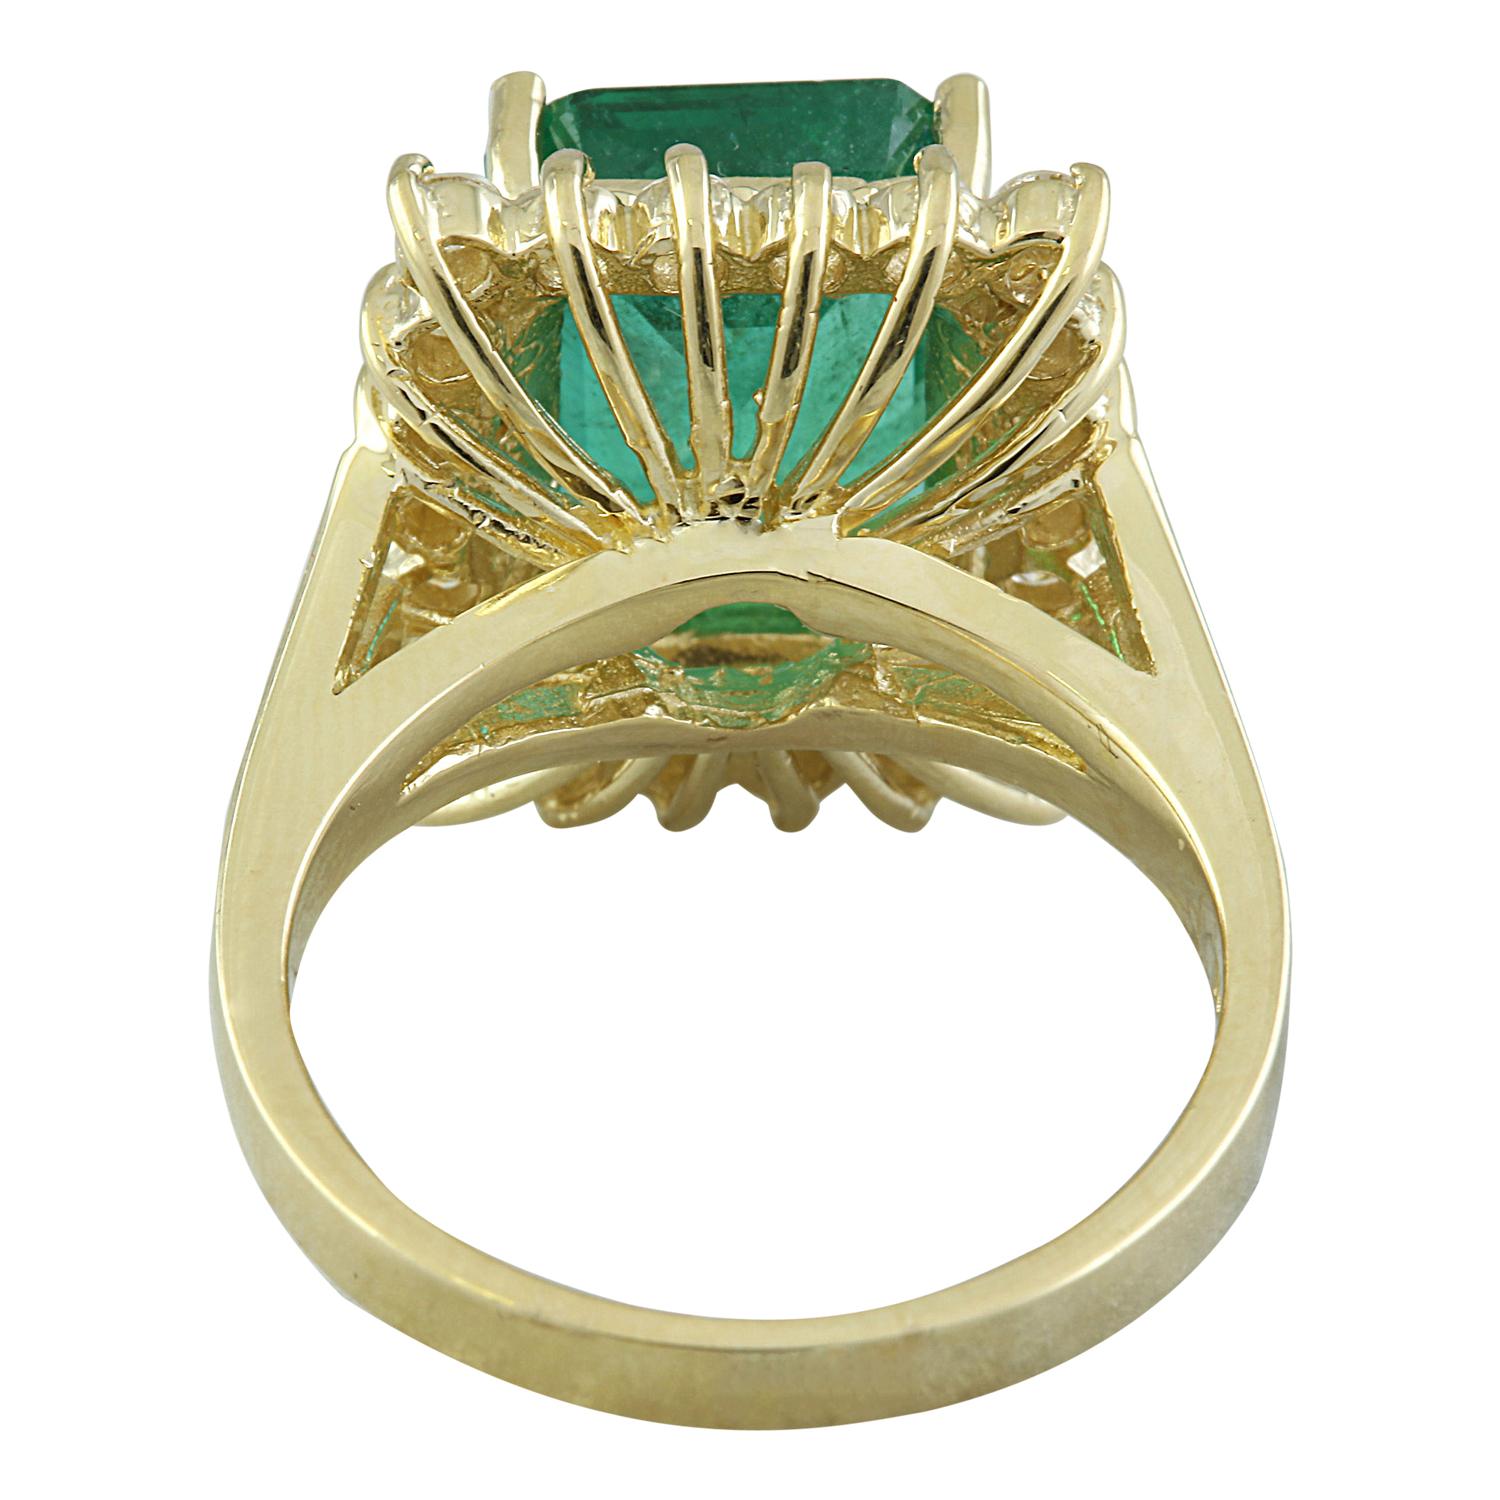 5.16 Carat Natural Emerald 14 Karat Solid Yellow Gold Diamond Ring In New Condition For Sale In Los Angeles, CA